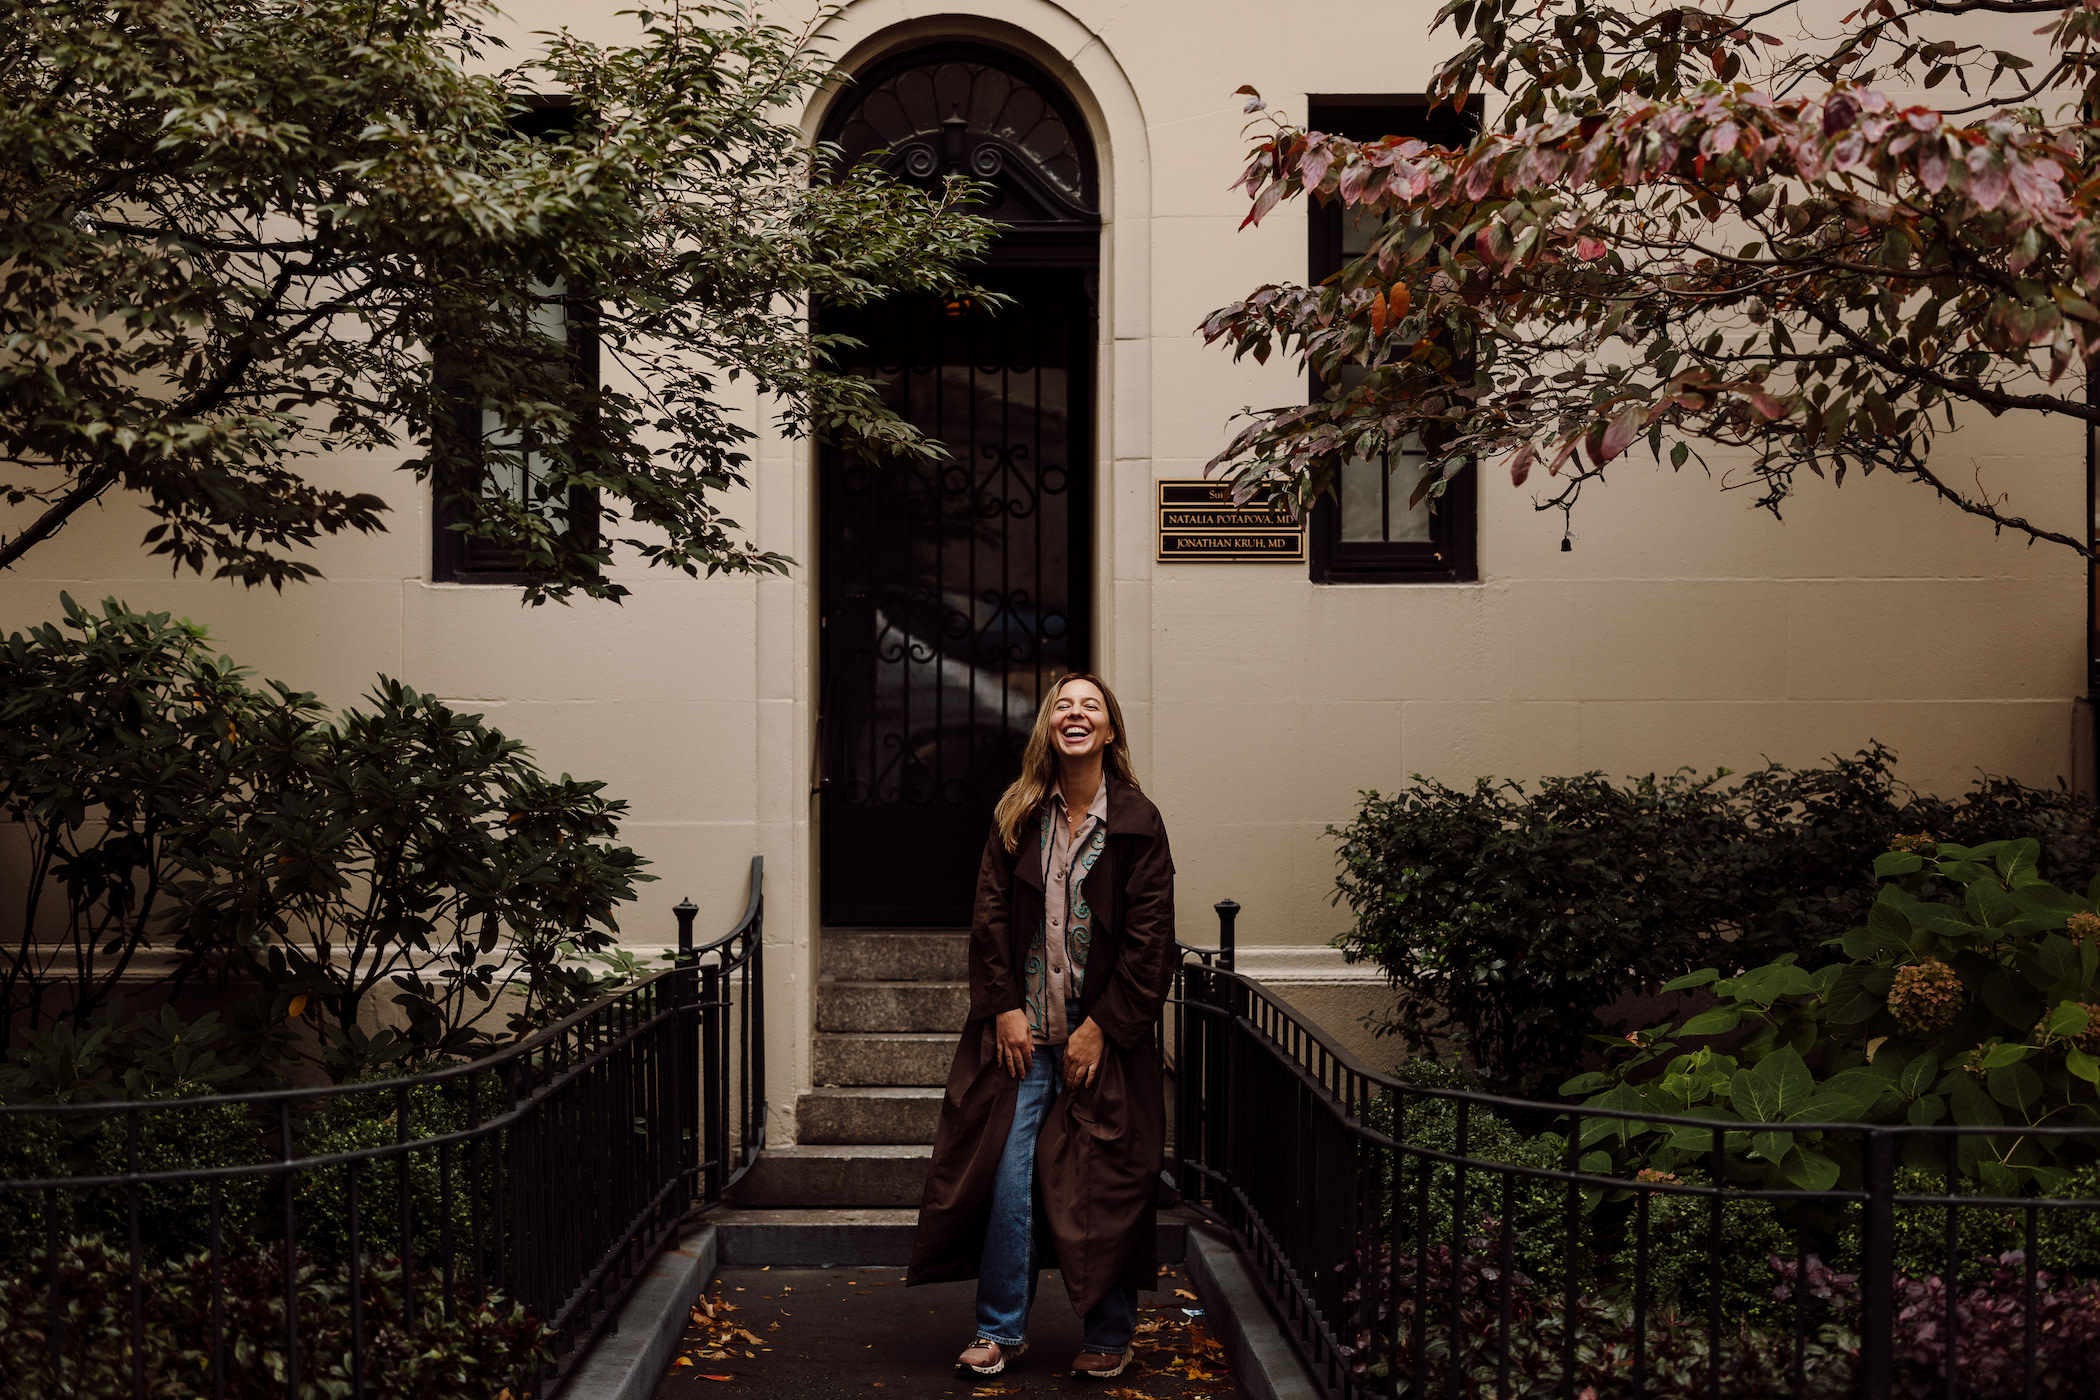 Author Jana standing and laughing in a courtyard